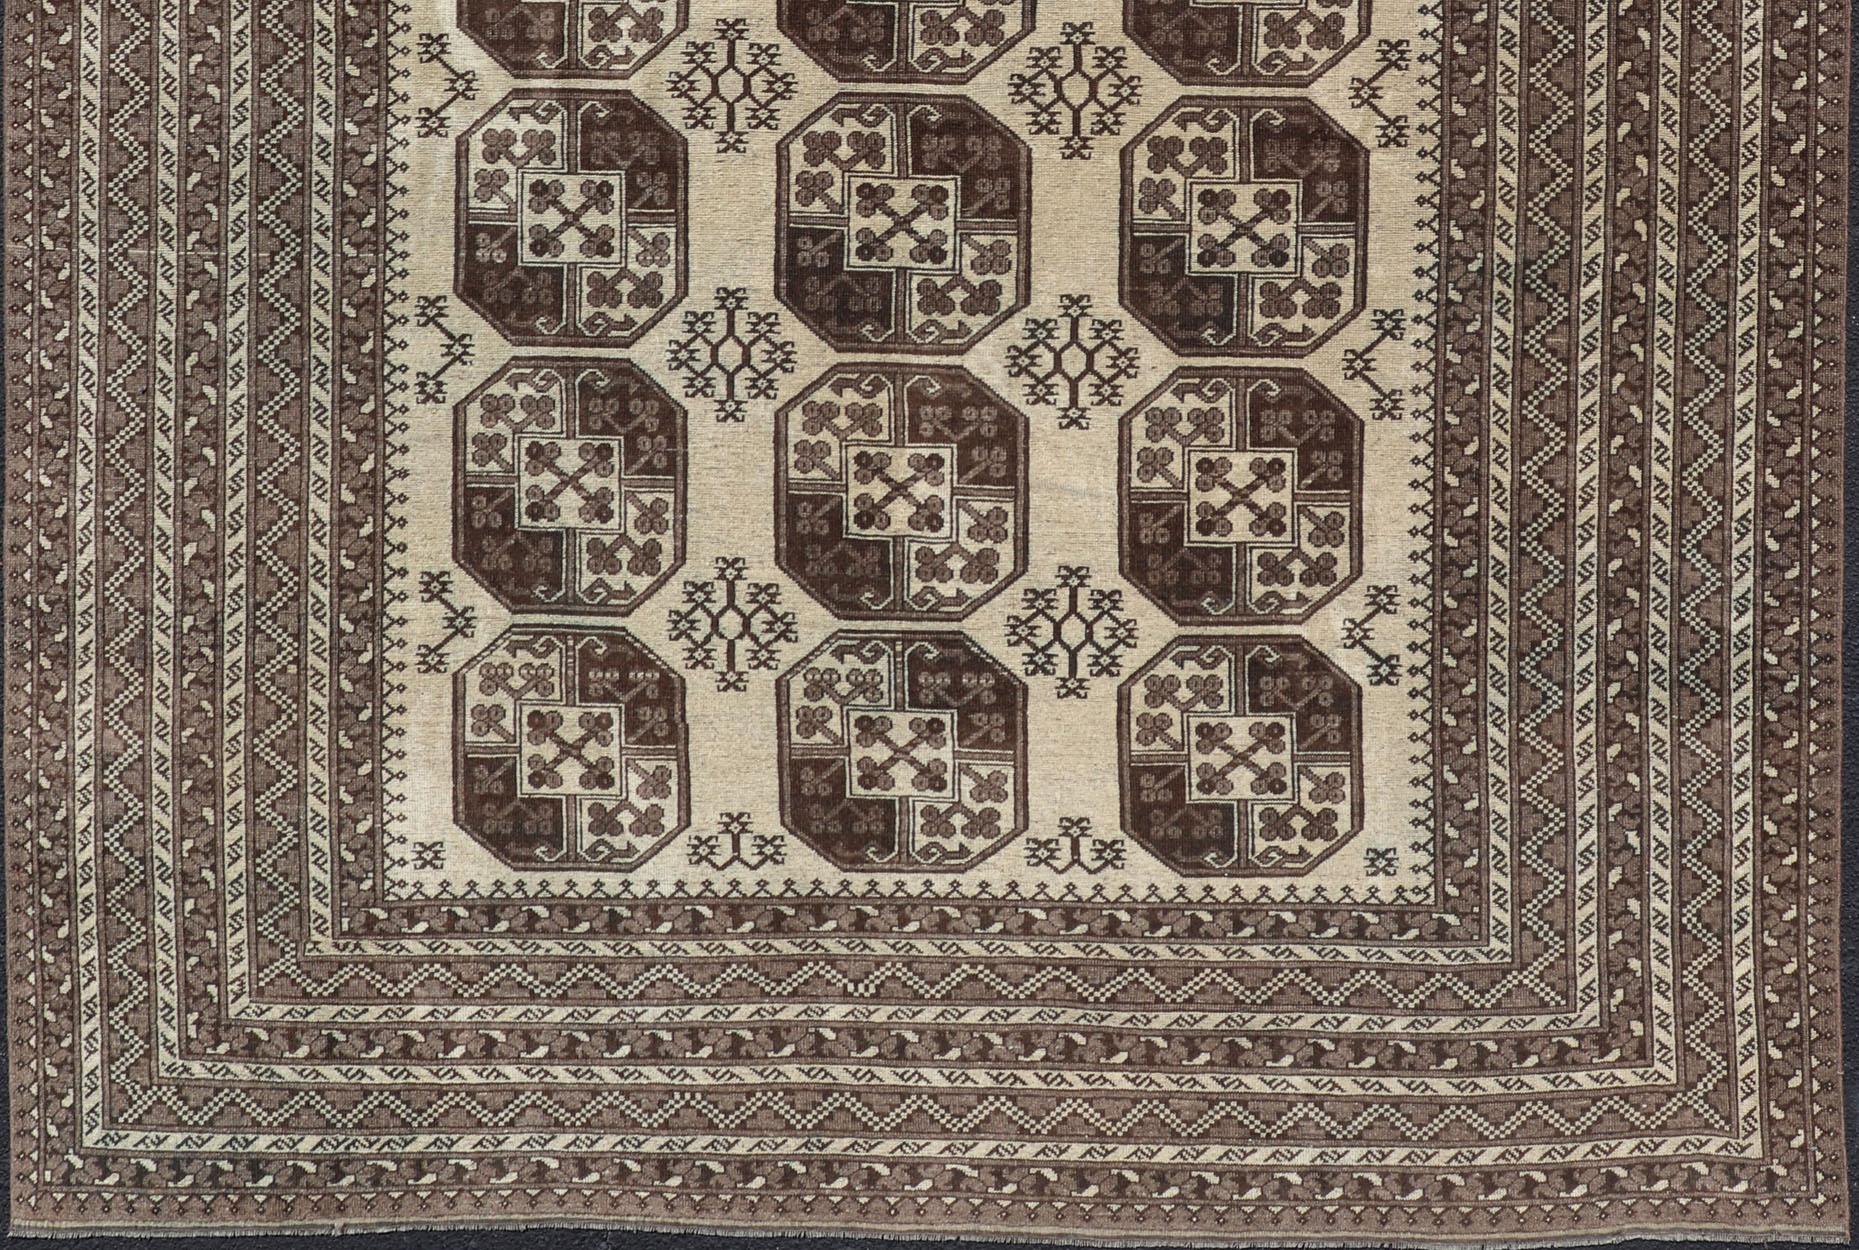 Hand-Knotted Ersari rug with All-Over Sub-Geometric Repeating Gul Design, Keivan Woven Arts; rug EMB-9652-P13542, country of origin / type: Turkestan / Ersari, circa 1940s.

Measures: 8'5 x 11'9. 
 
 This Ersari rug has been hand-knotted in the